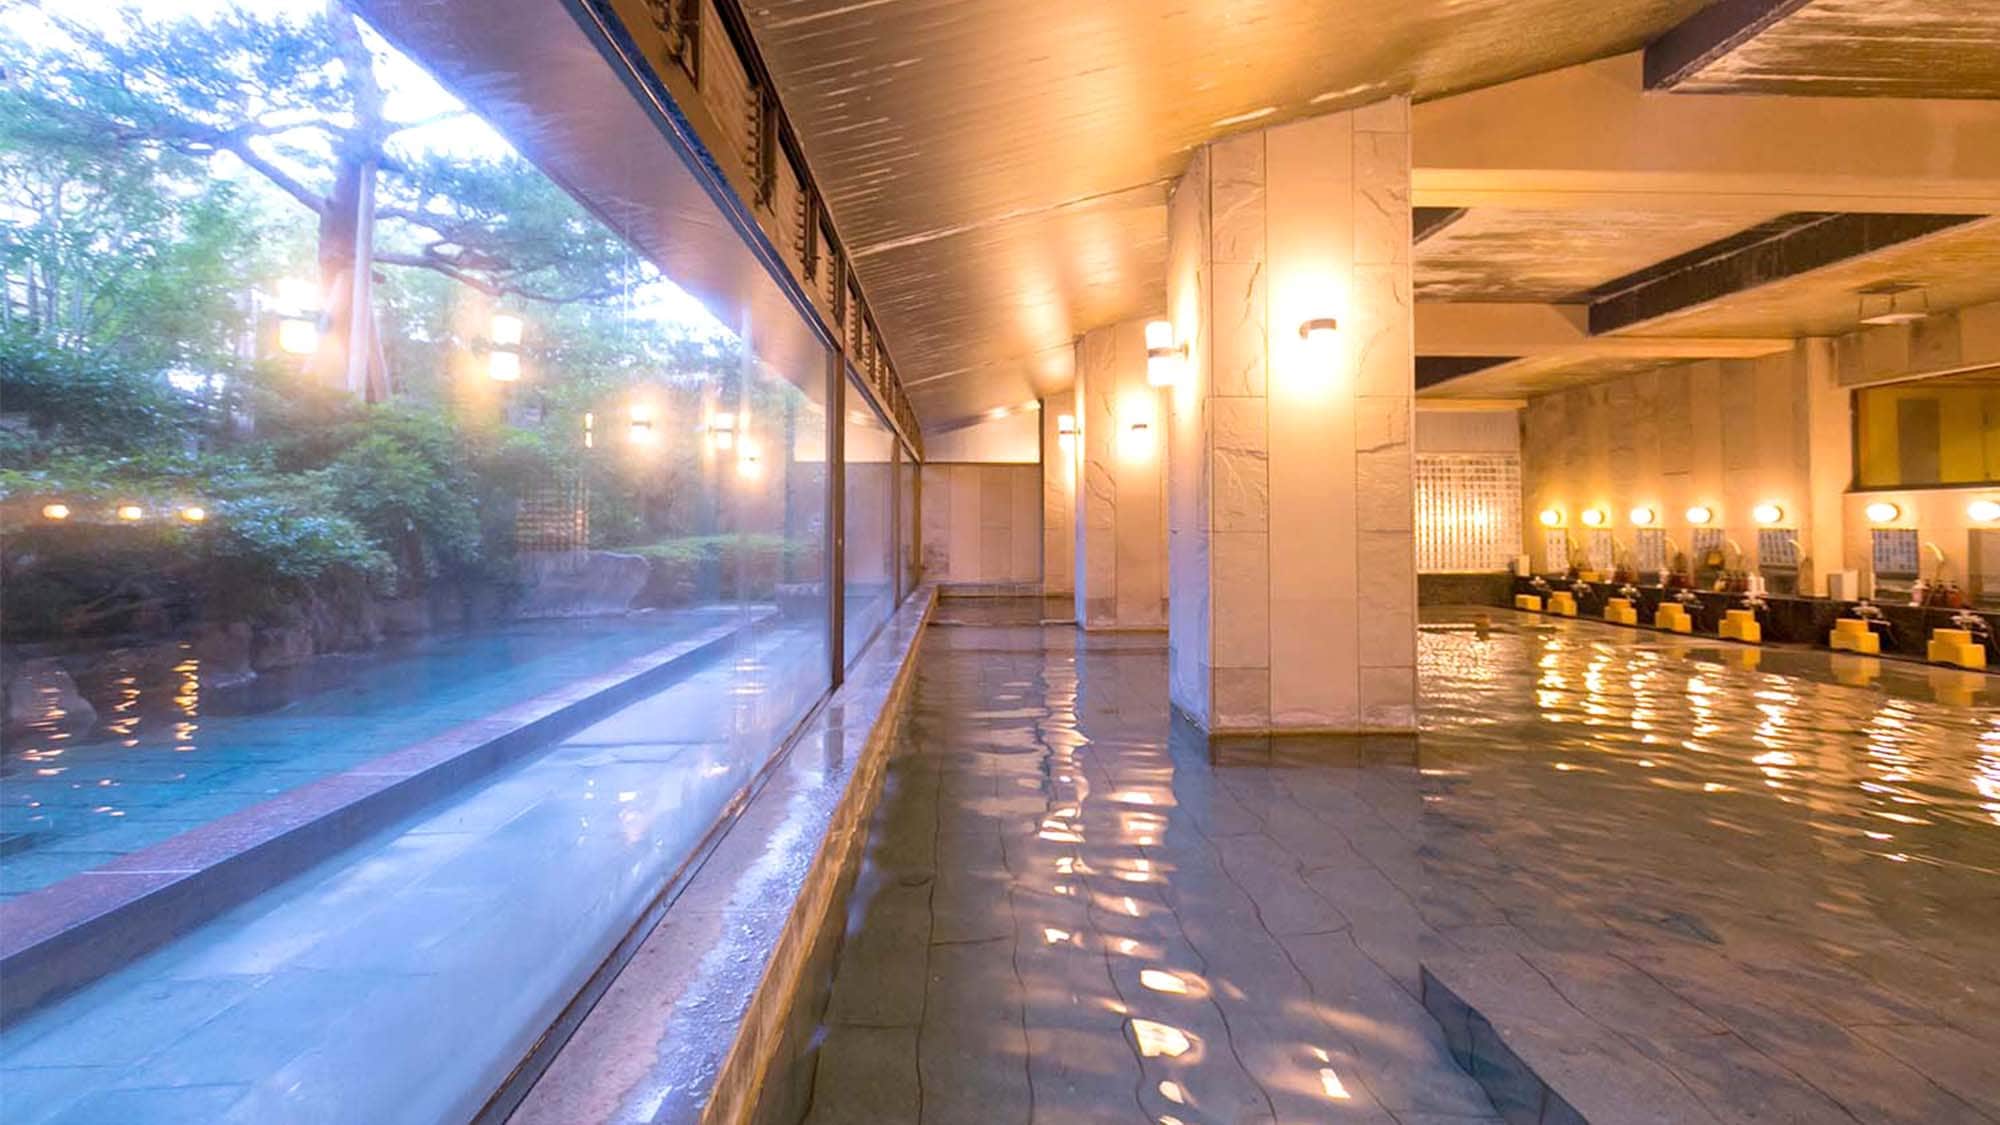 [Toyoake] Men's public bath. Please enjoy the highly effective hot water that has been springing up since 1300.